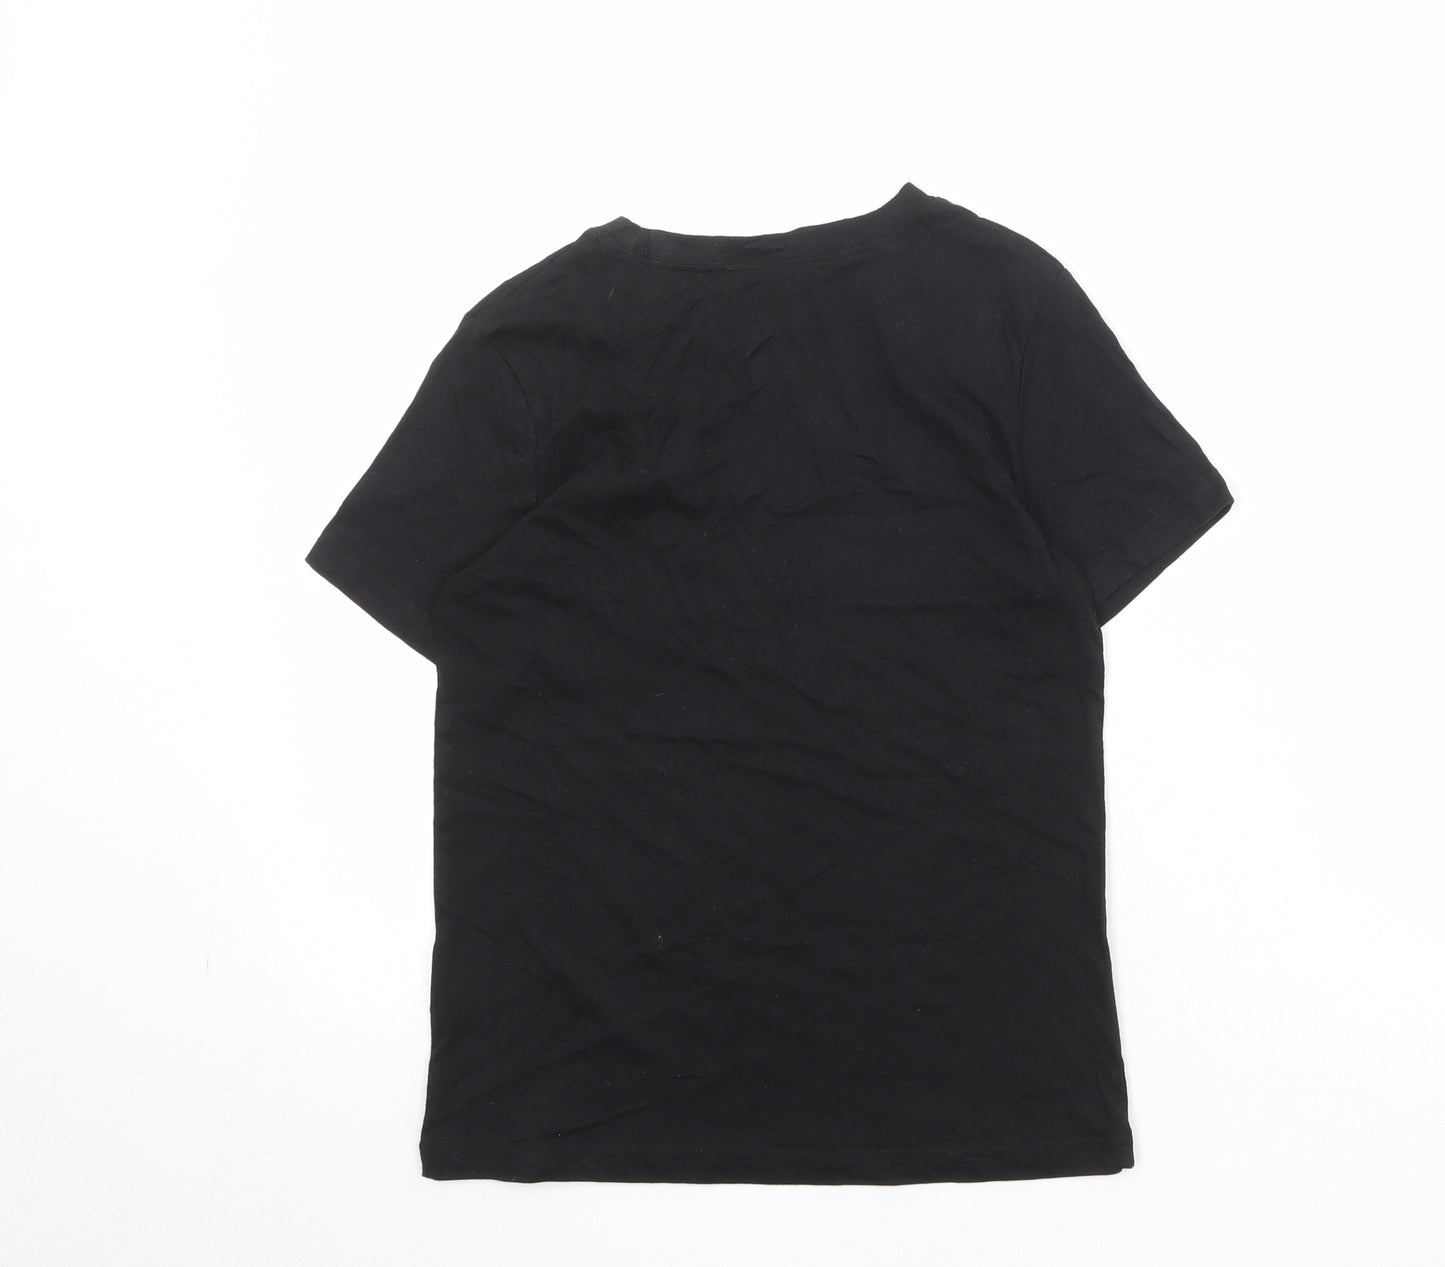 H&M Boys Black 100% Cotton Basic T-Shirt Size 8-9 Years Round Neck Pullover - X-Ray